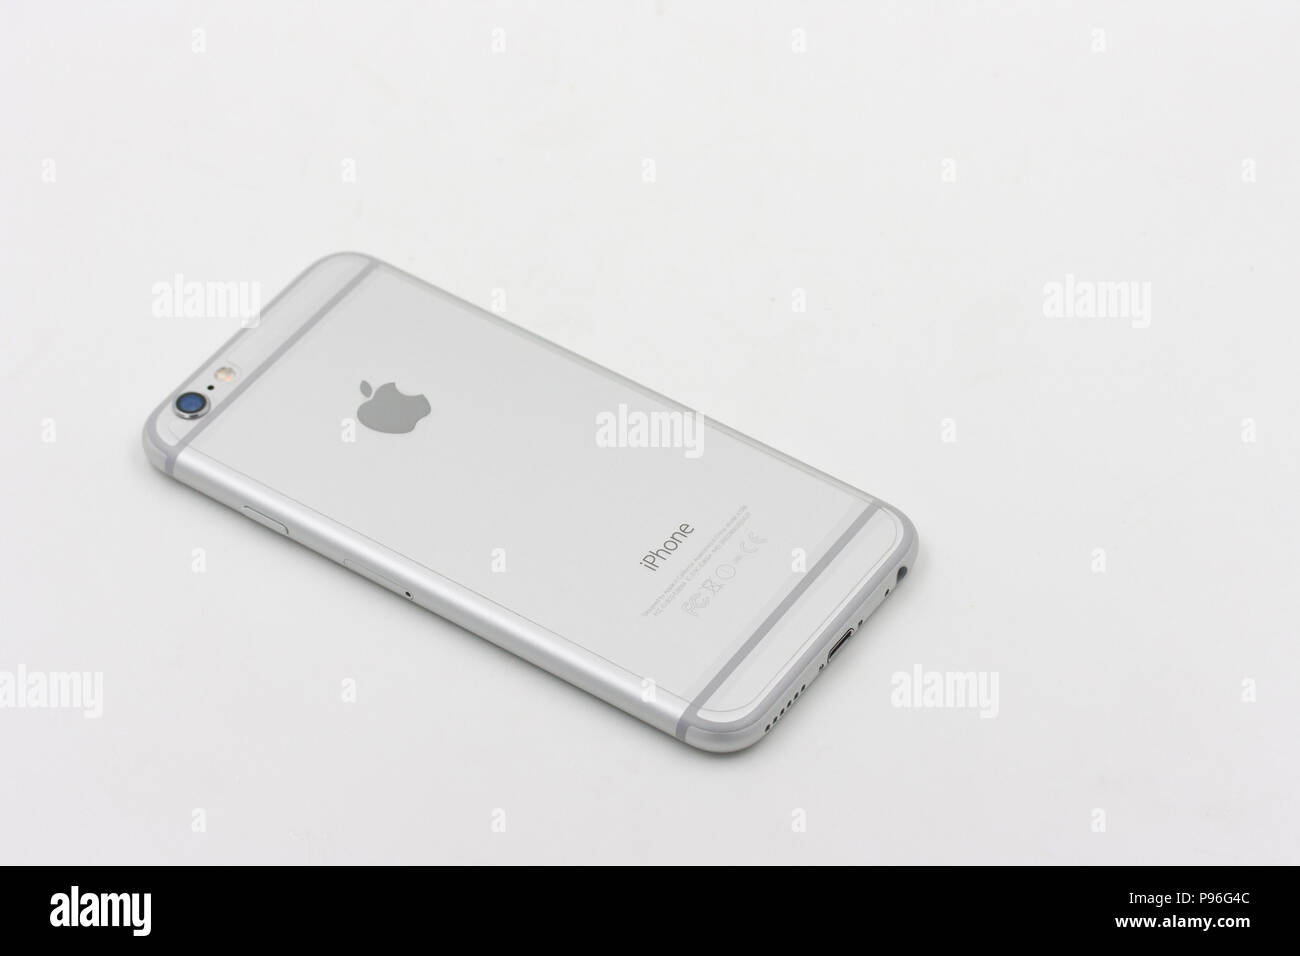 BANGKOK, THAILAND - MAY 7, 2015. Back of Apple Iphone 6 in white color laying on white background. Stock Photo